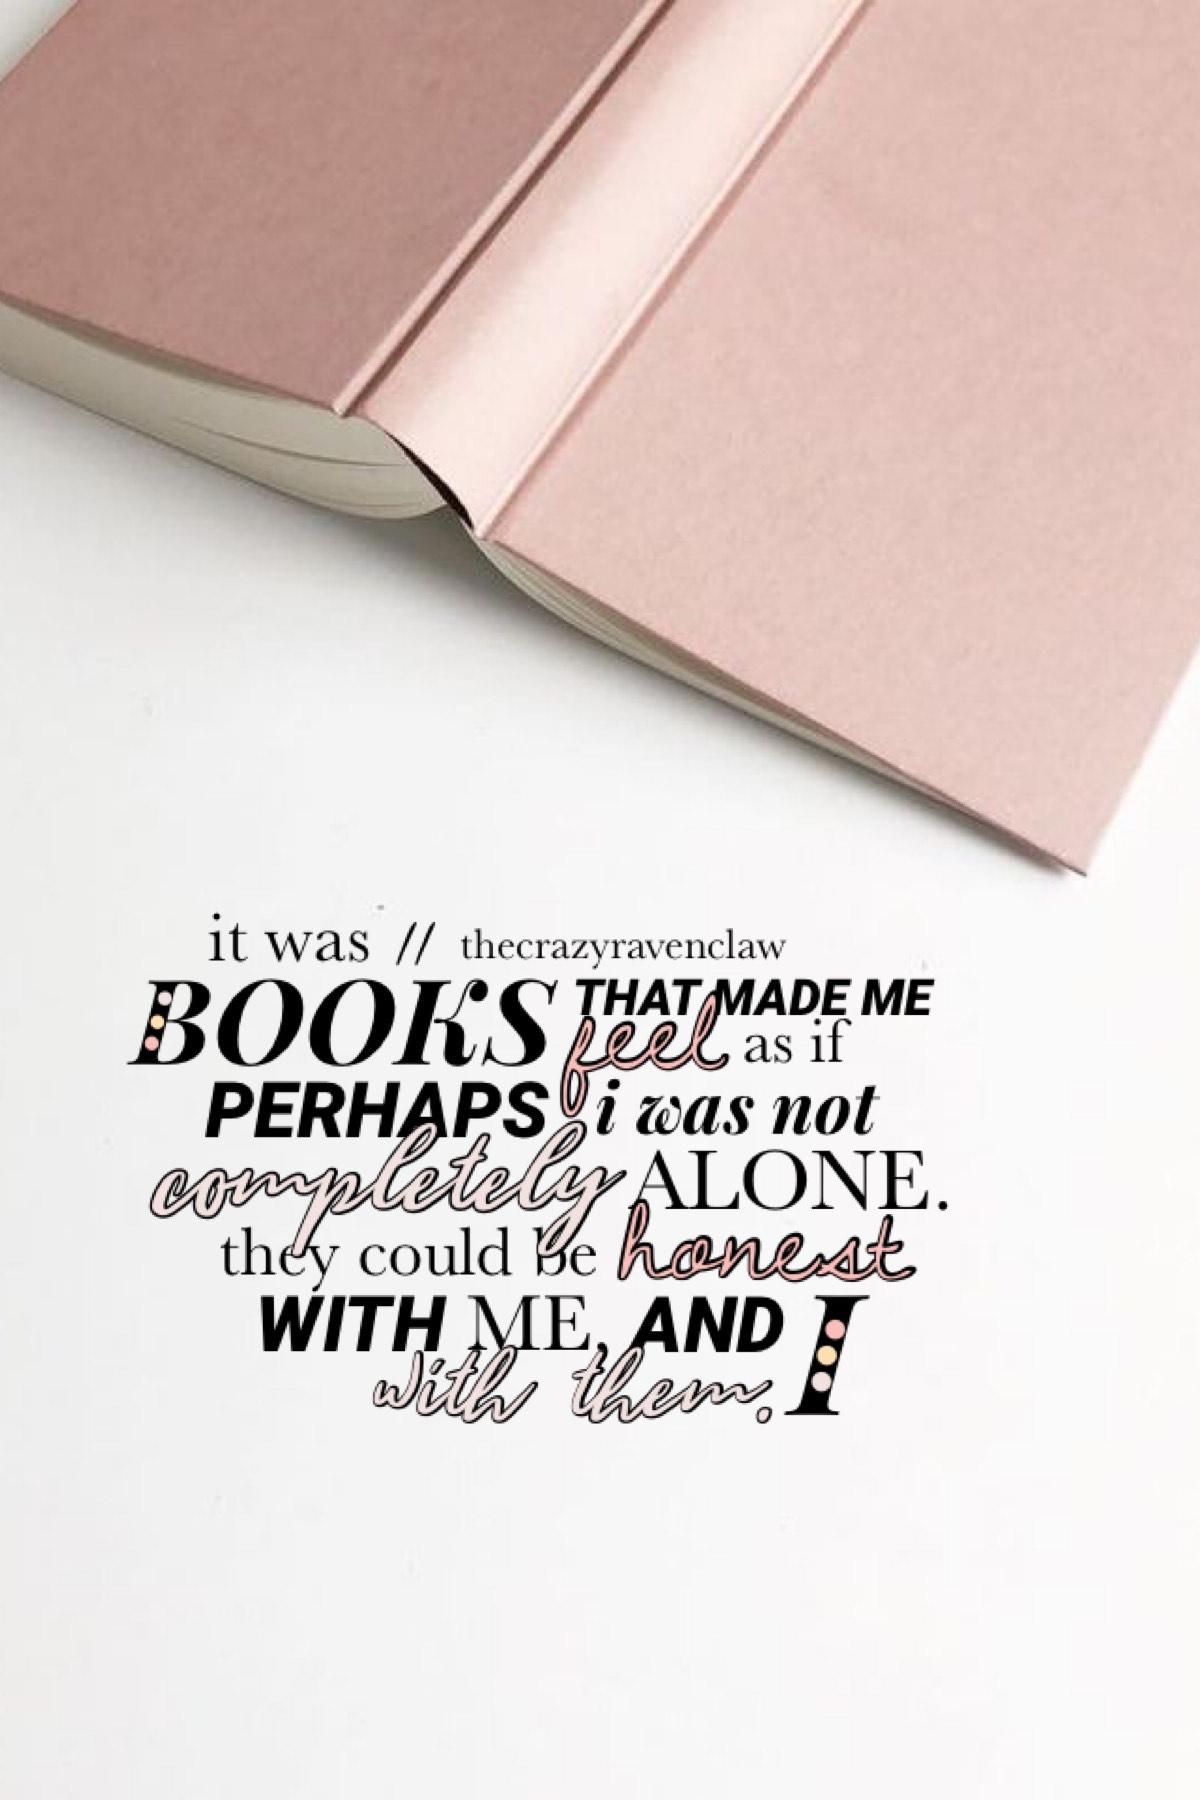 quote by will herondale aka one of my favorite literary characters of all time i love him sO mUcH,,
anyway i’m rlly getting back into shadowhunters again so that’s that :P 
i made a bunch of collages on the plane so i’ll have some good posting material fo